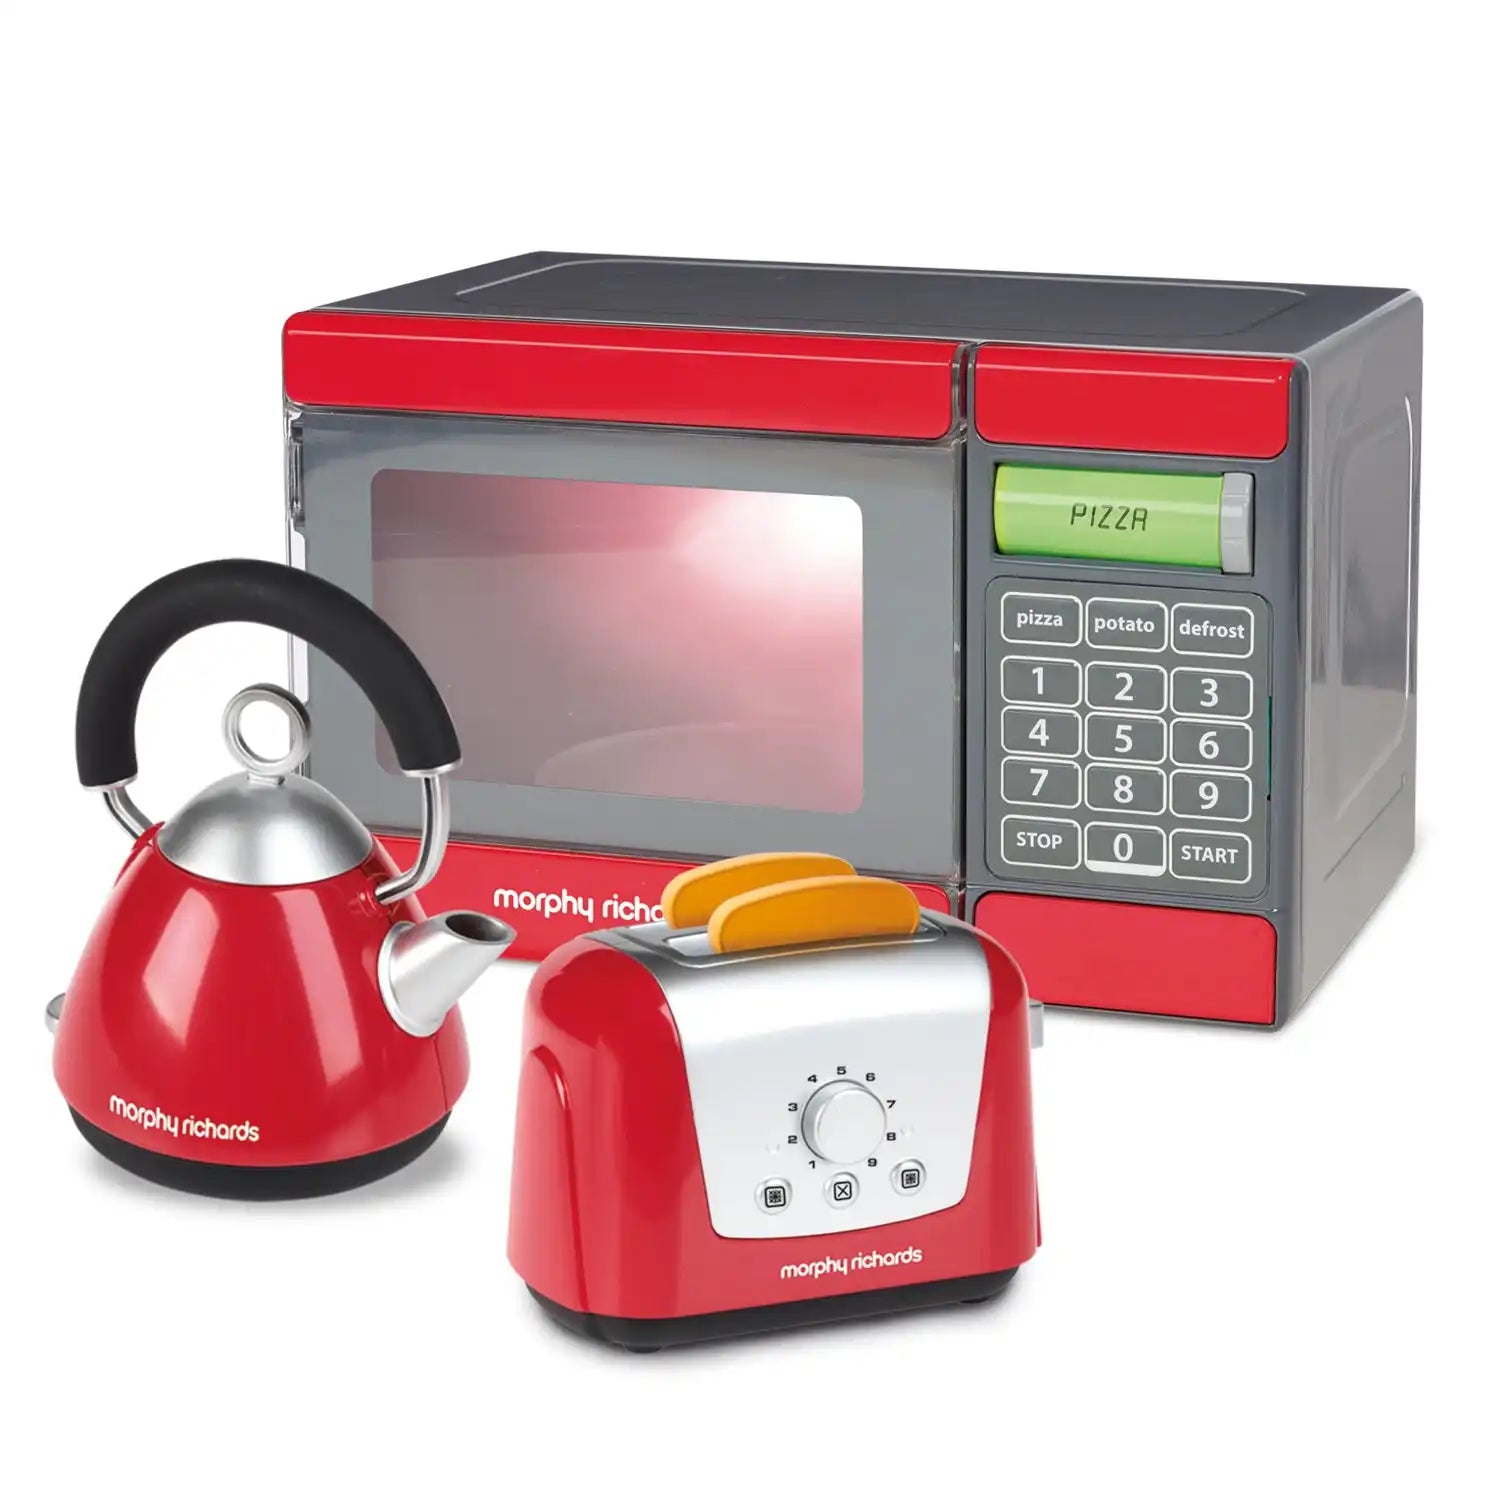 Casdon - Morphy Richards Microwave Kettle & Toaster Toy